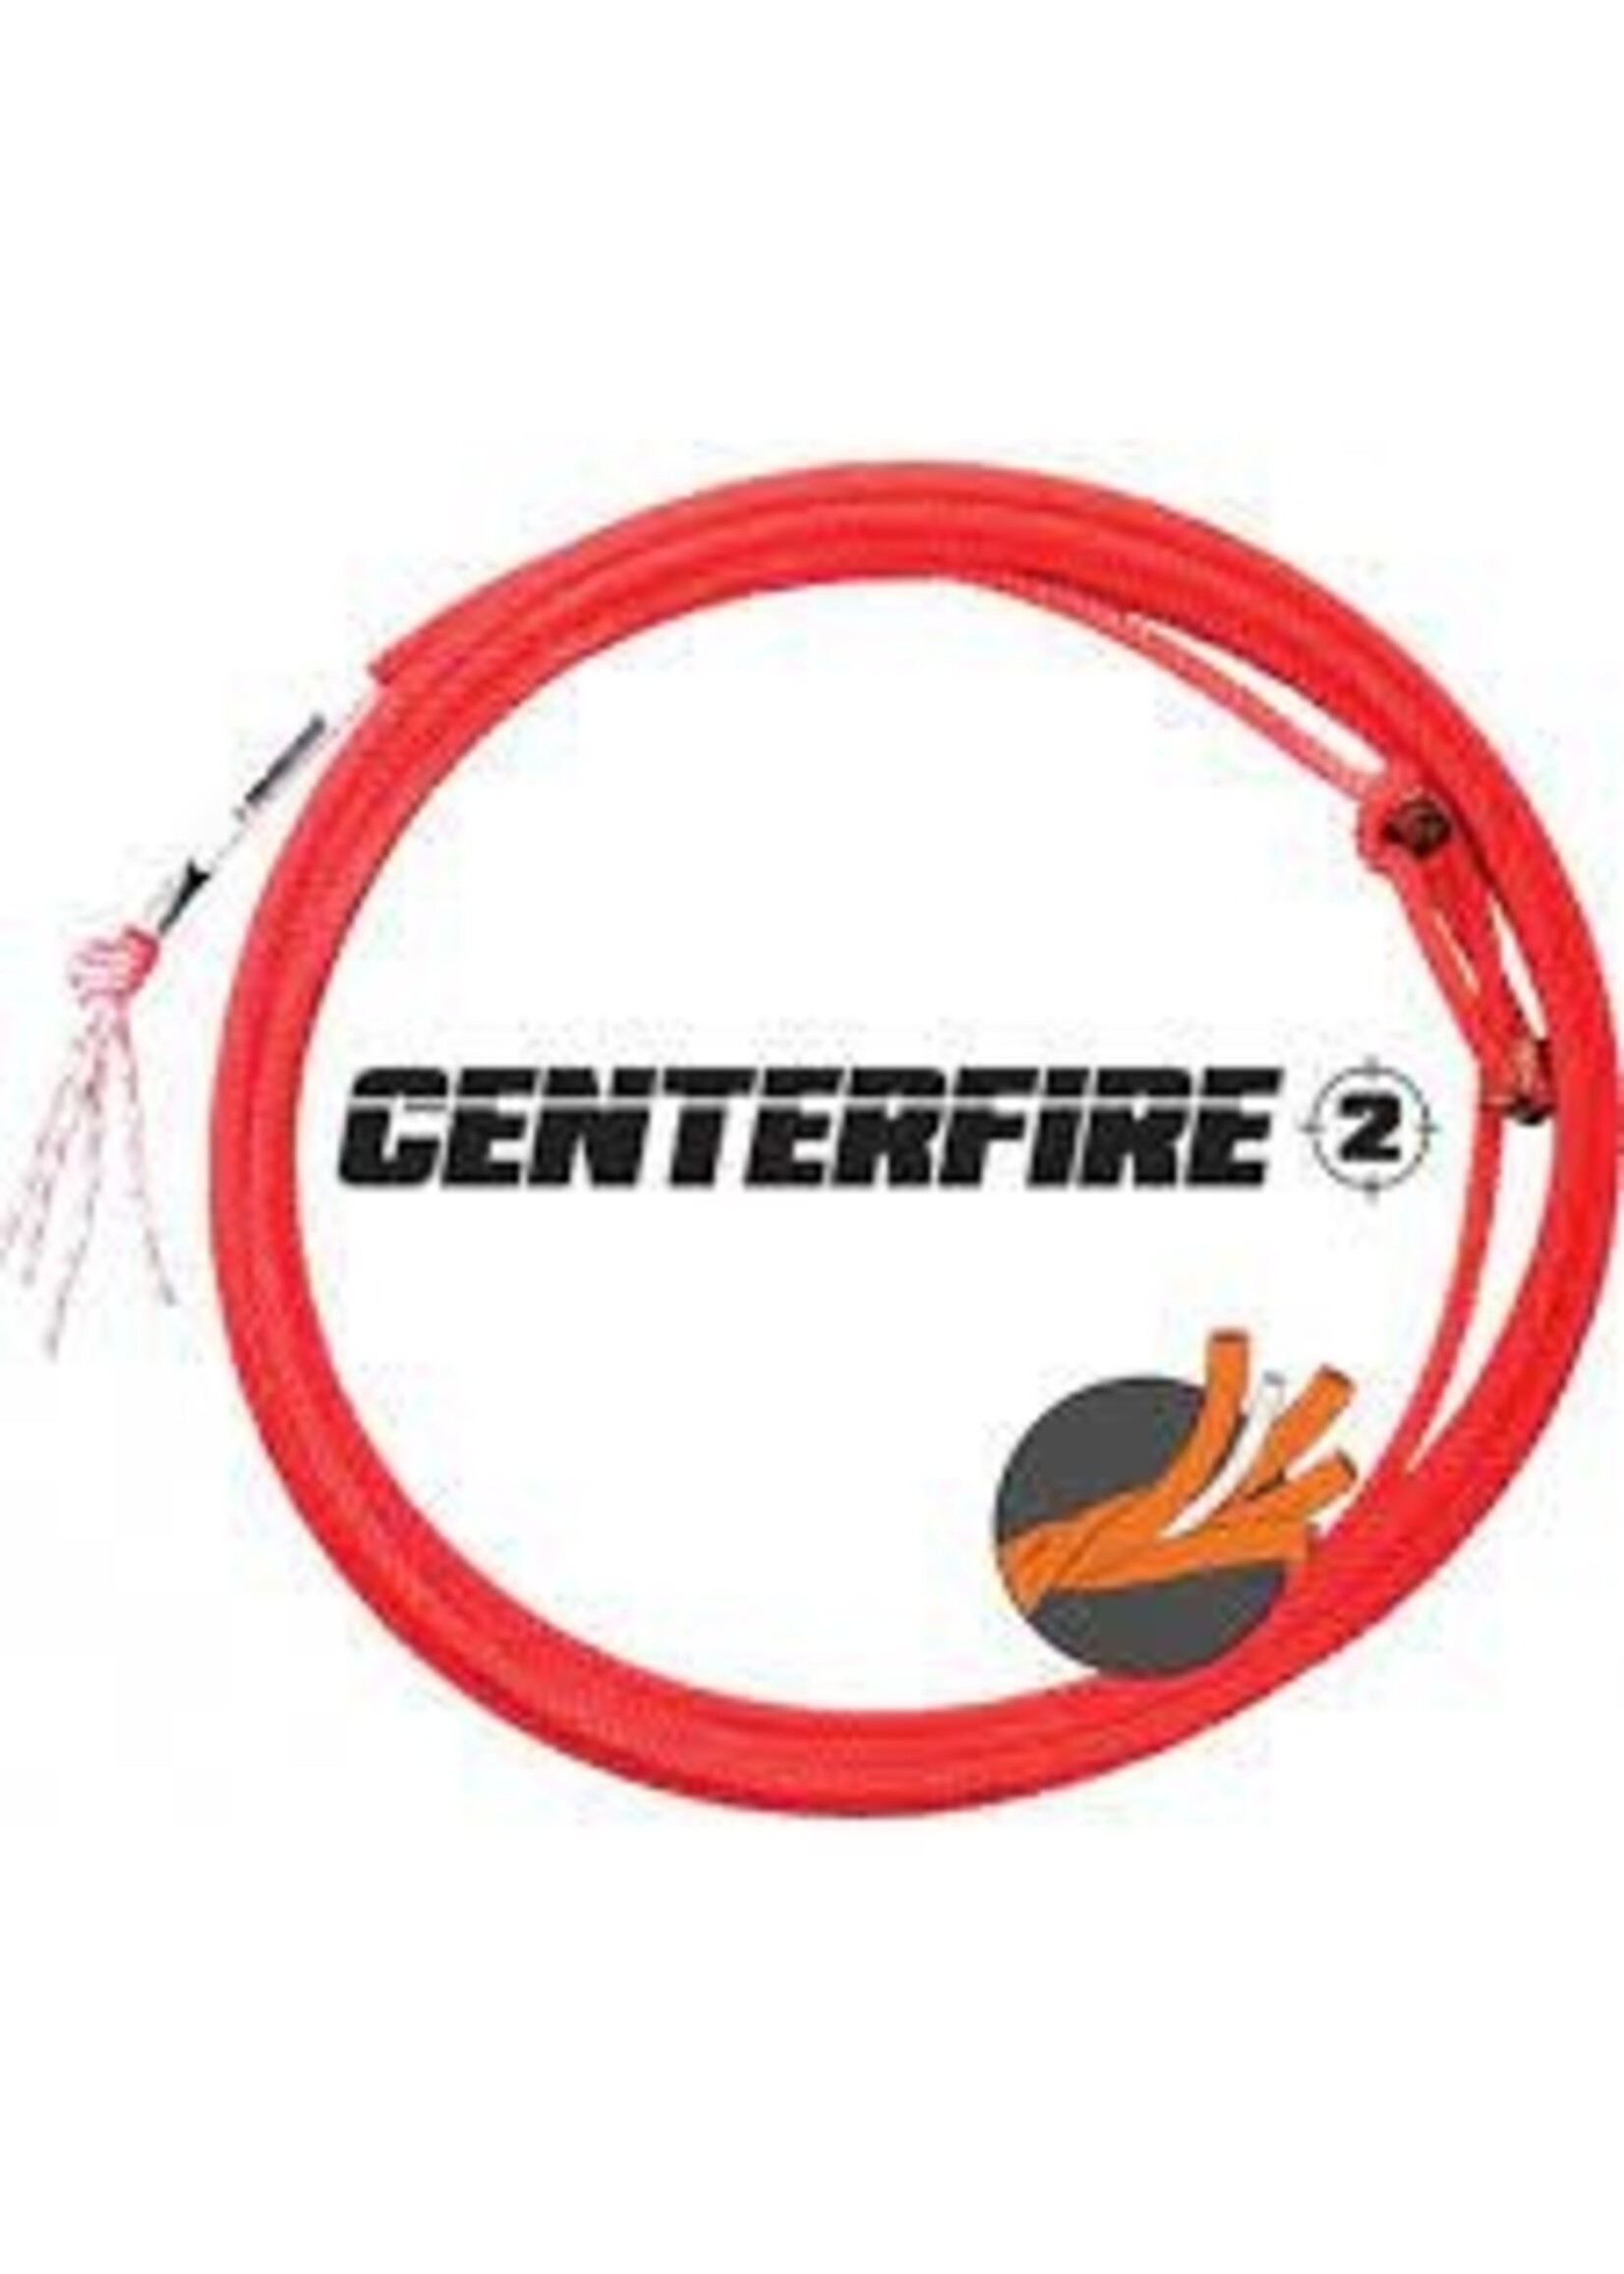 Fast Back Head Rope - Centerfire2